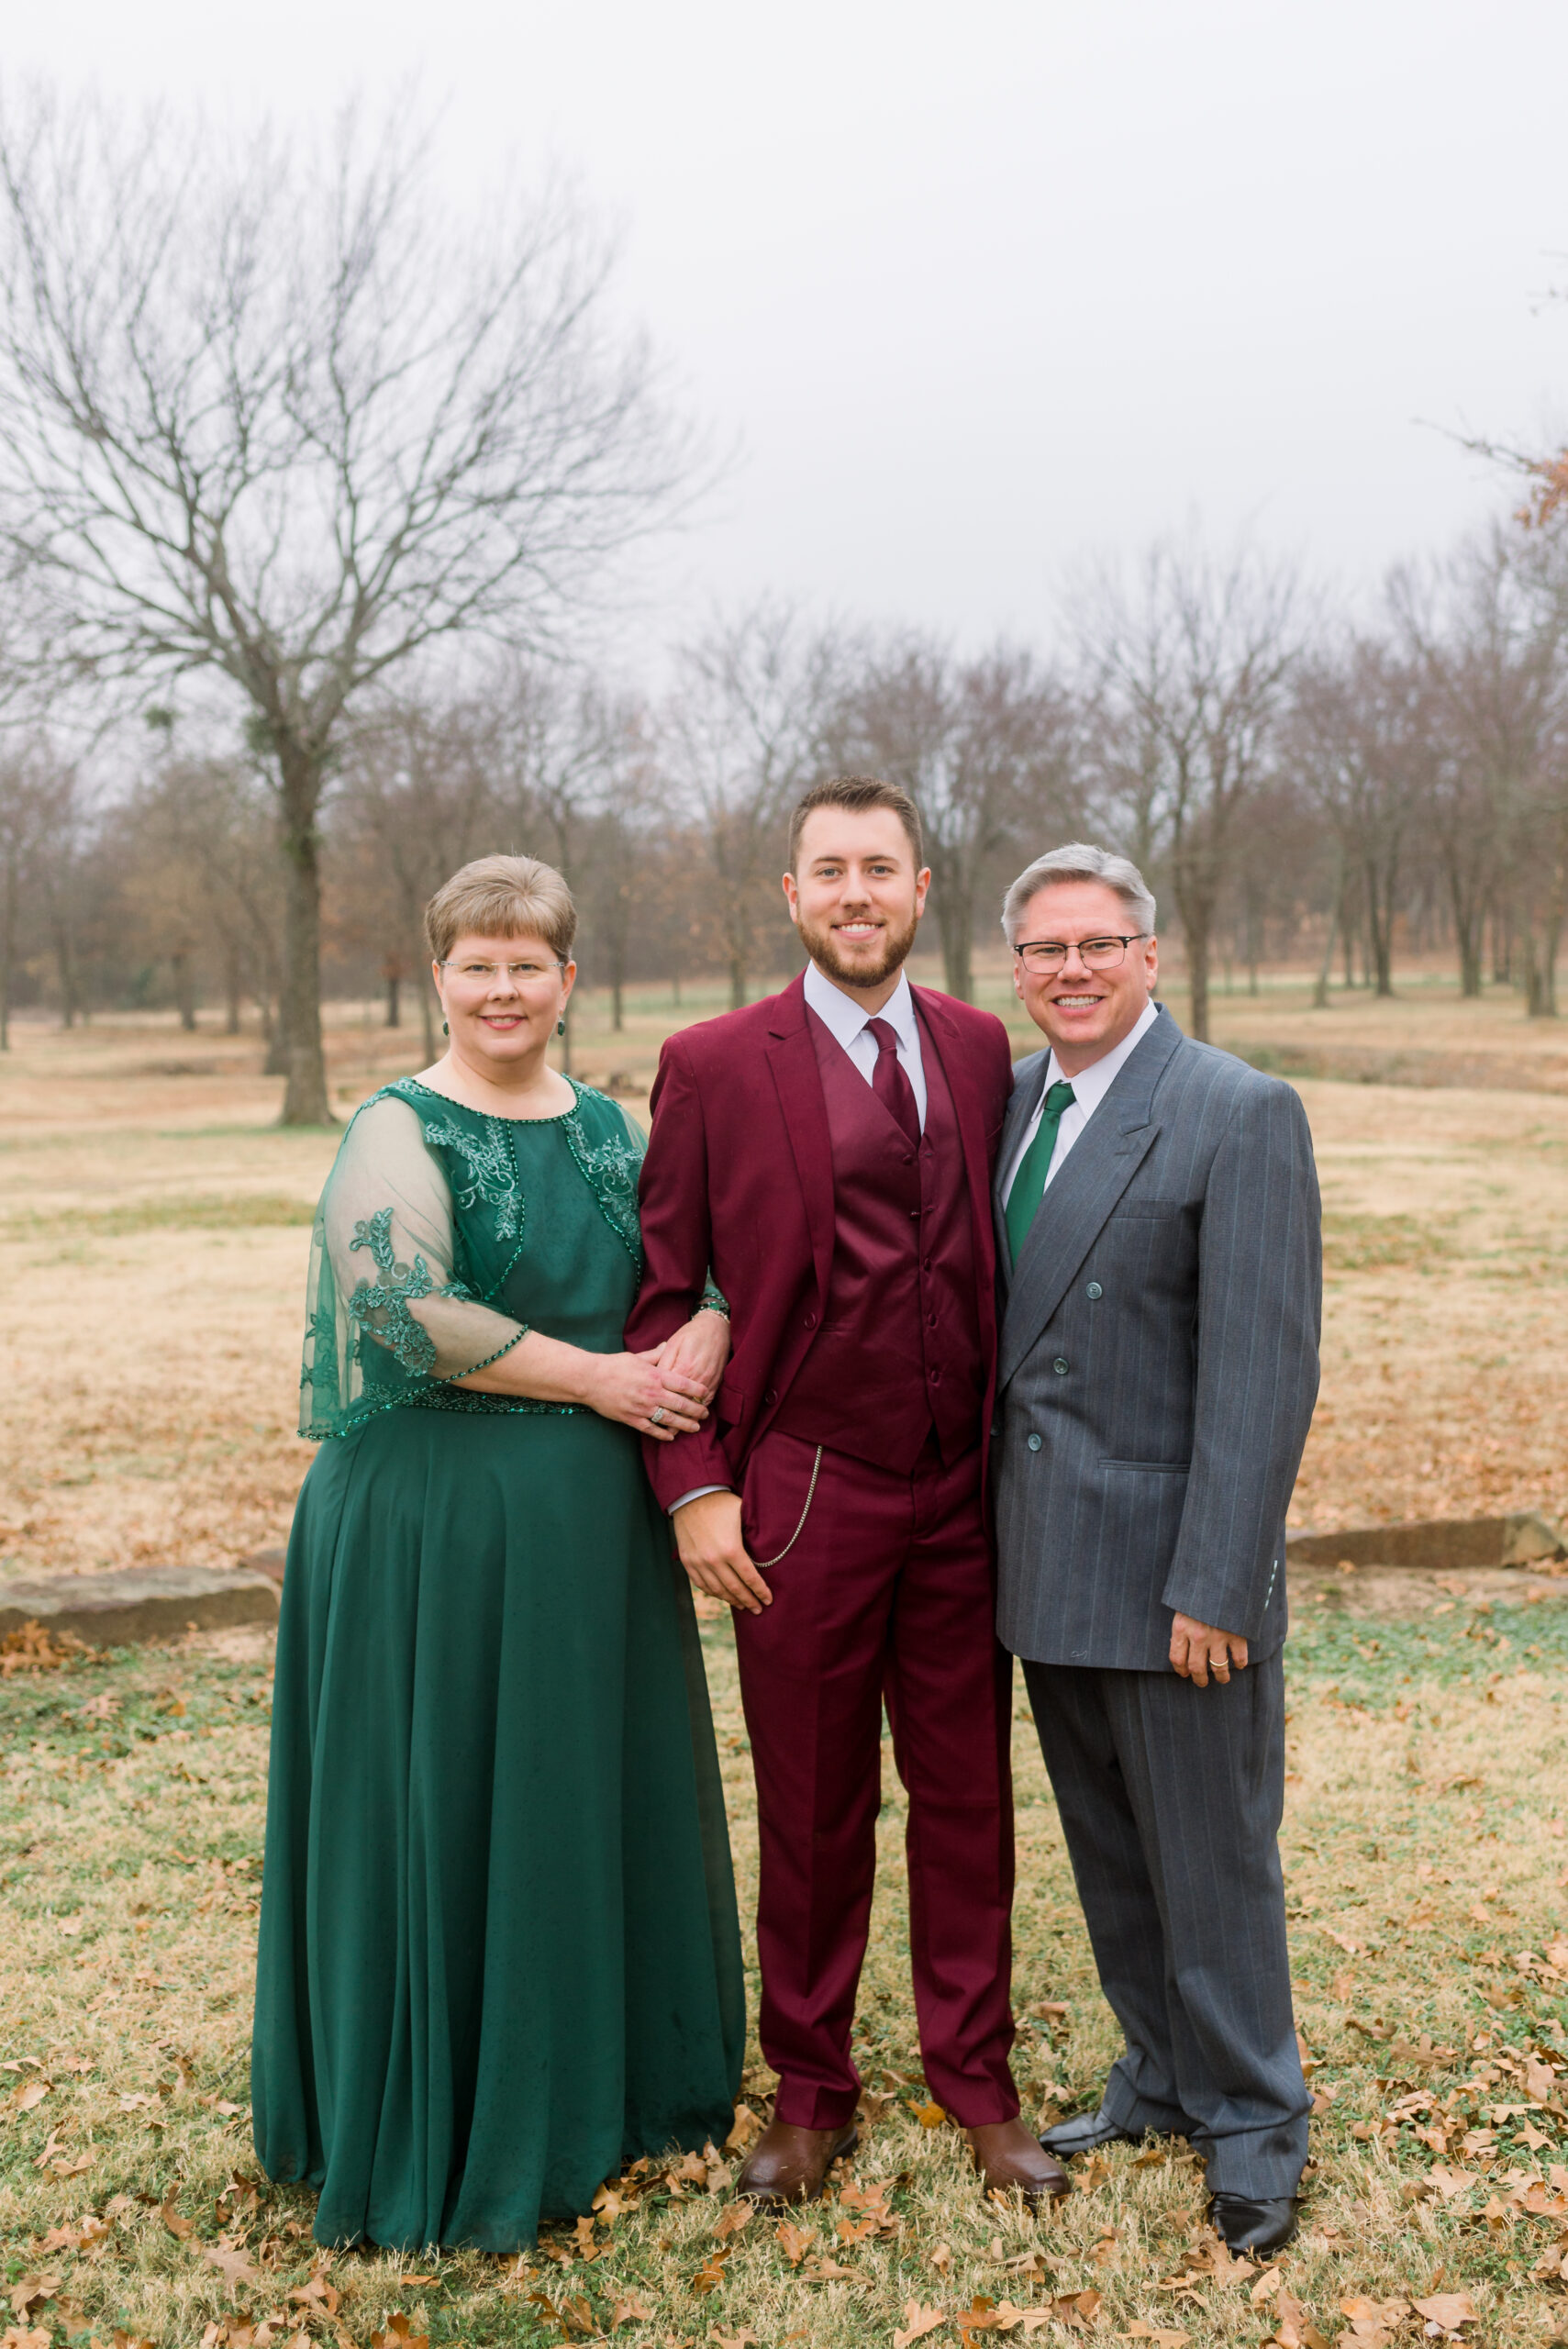 Elizabeth Kane Photography Tulsa Oklahoma Texas Luxury Wedding Photographer Family Formals Photos Wedding Florals Inspiration Burgundy Grooms Suit Forest Green Mother of the Groom Dress 